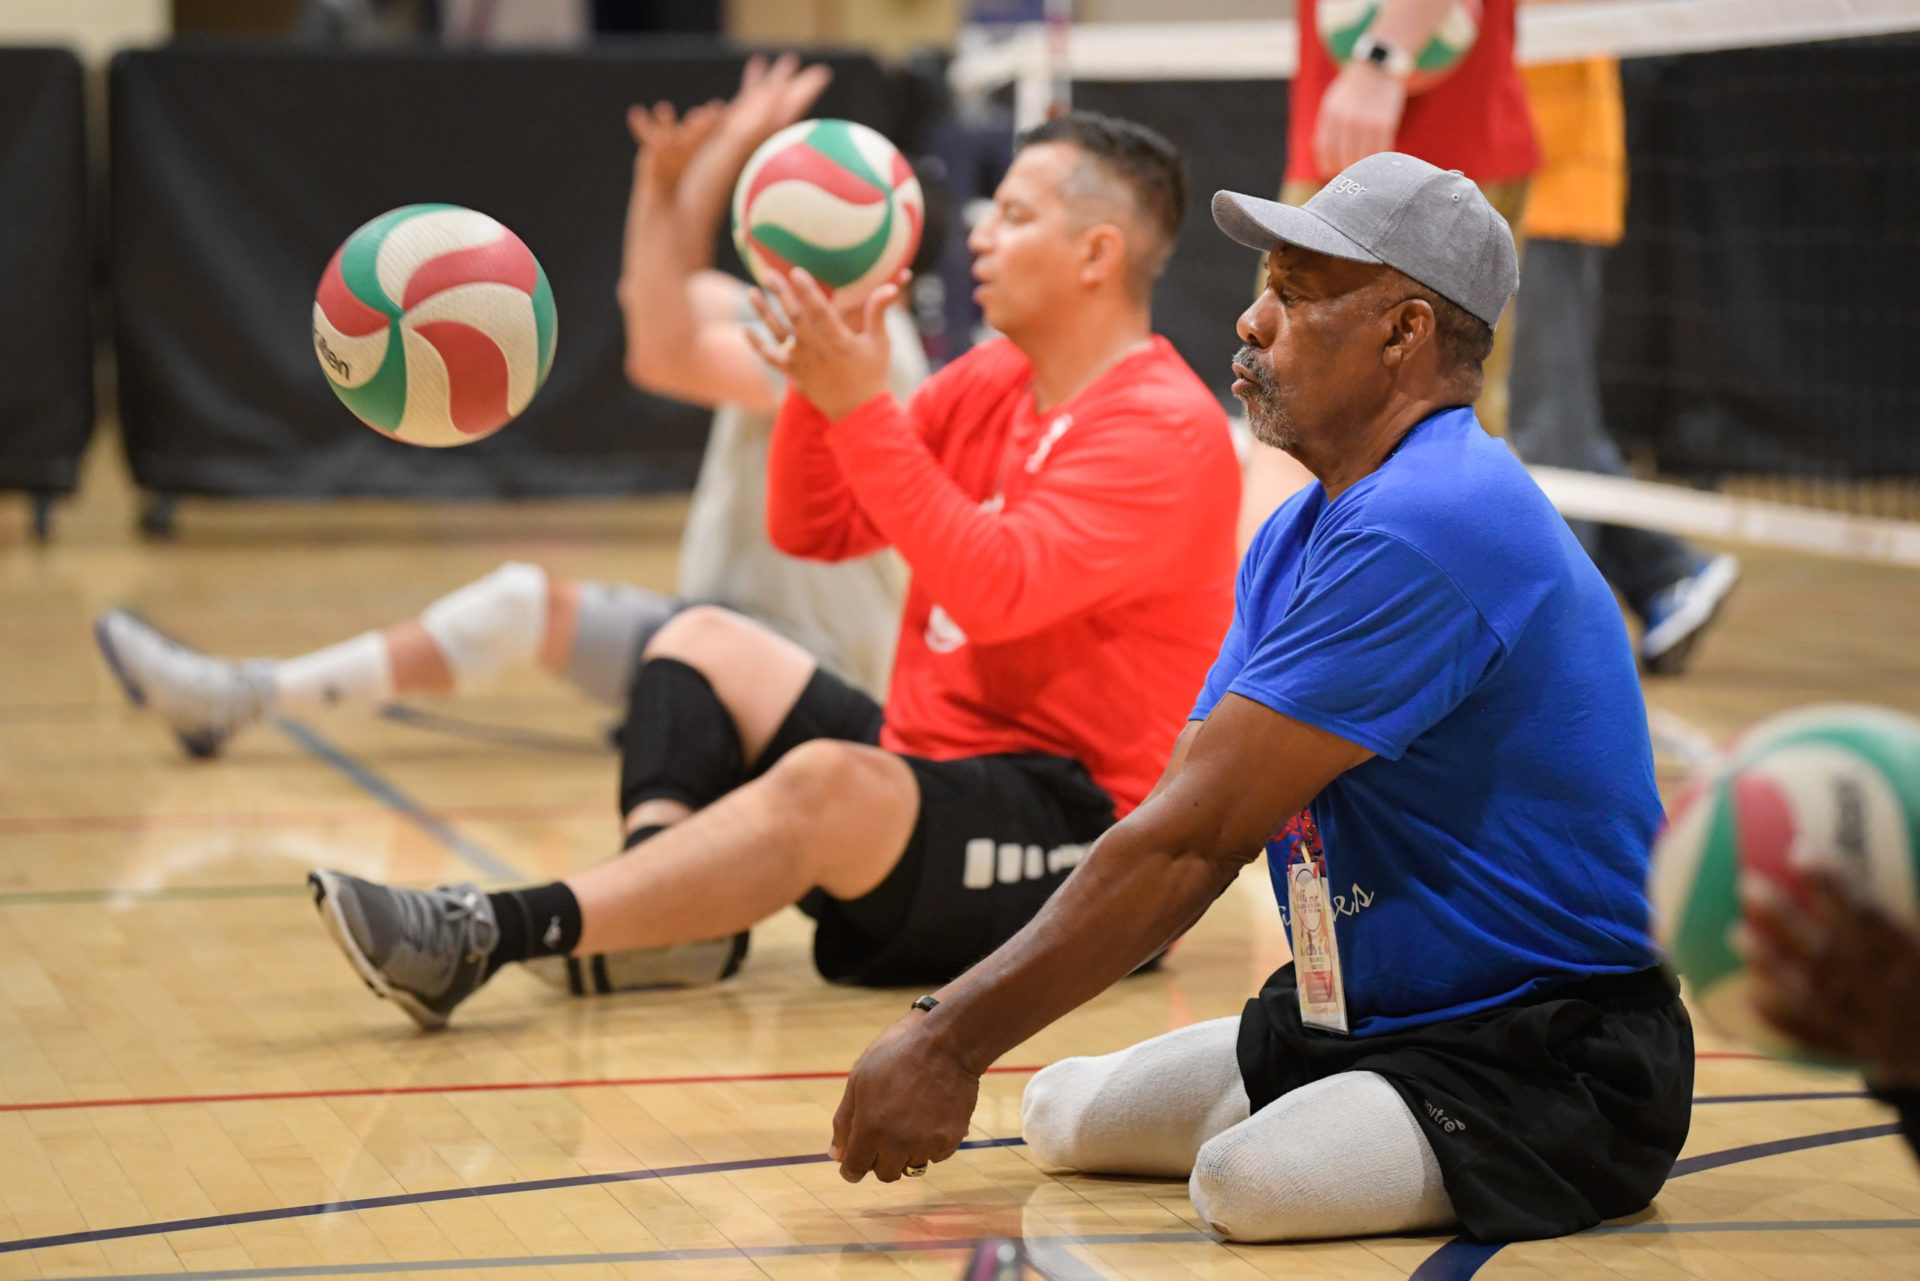 Three disabled athletes participating in seated volleyball.